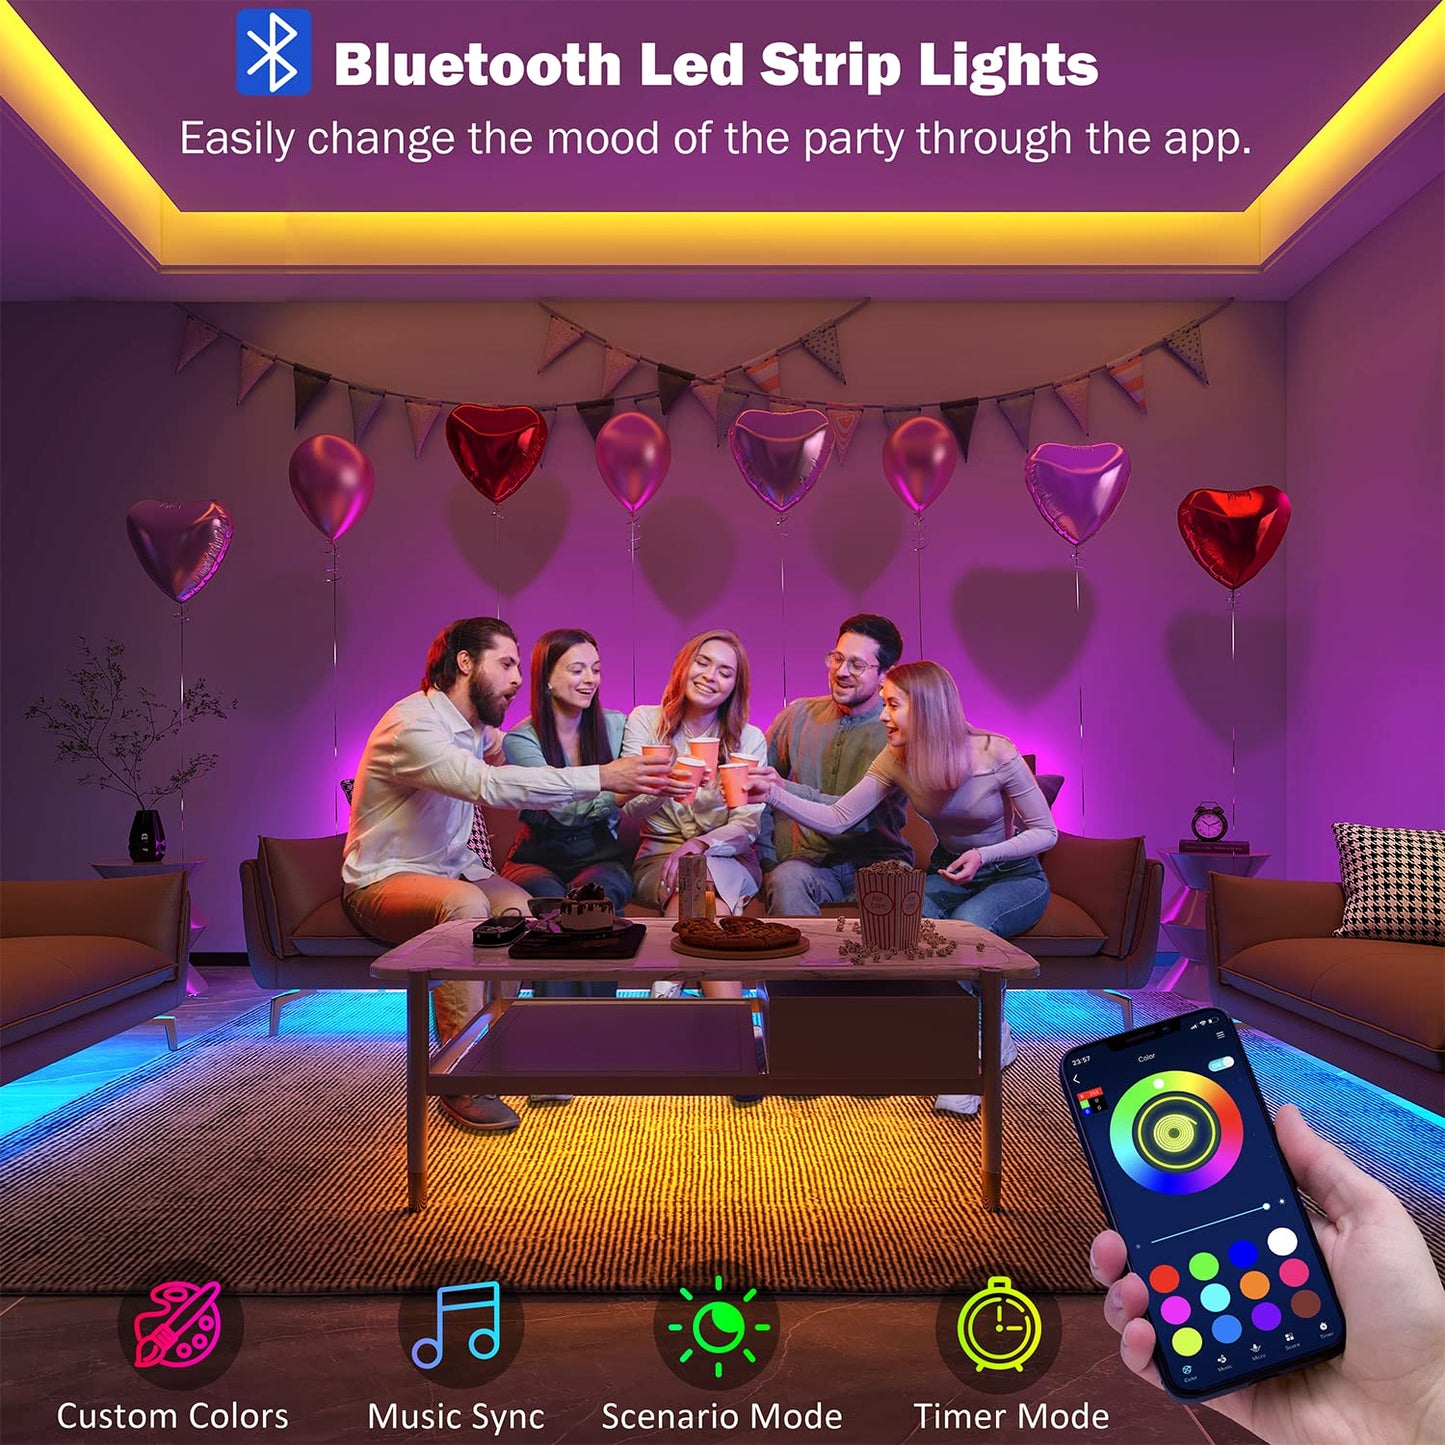 Leeleberd Led Lights for Bedroom 100 ft (2 Rolls of 50ft) Music Sync Color Changing RGB Led Strip Lights with Remote App Control Bluetooth Led Strip, Led Lights for Room Home Kitchen Decor Party